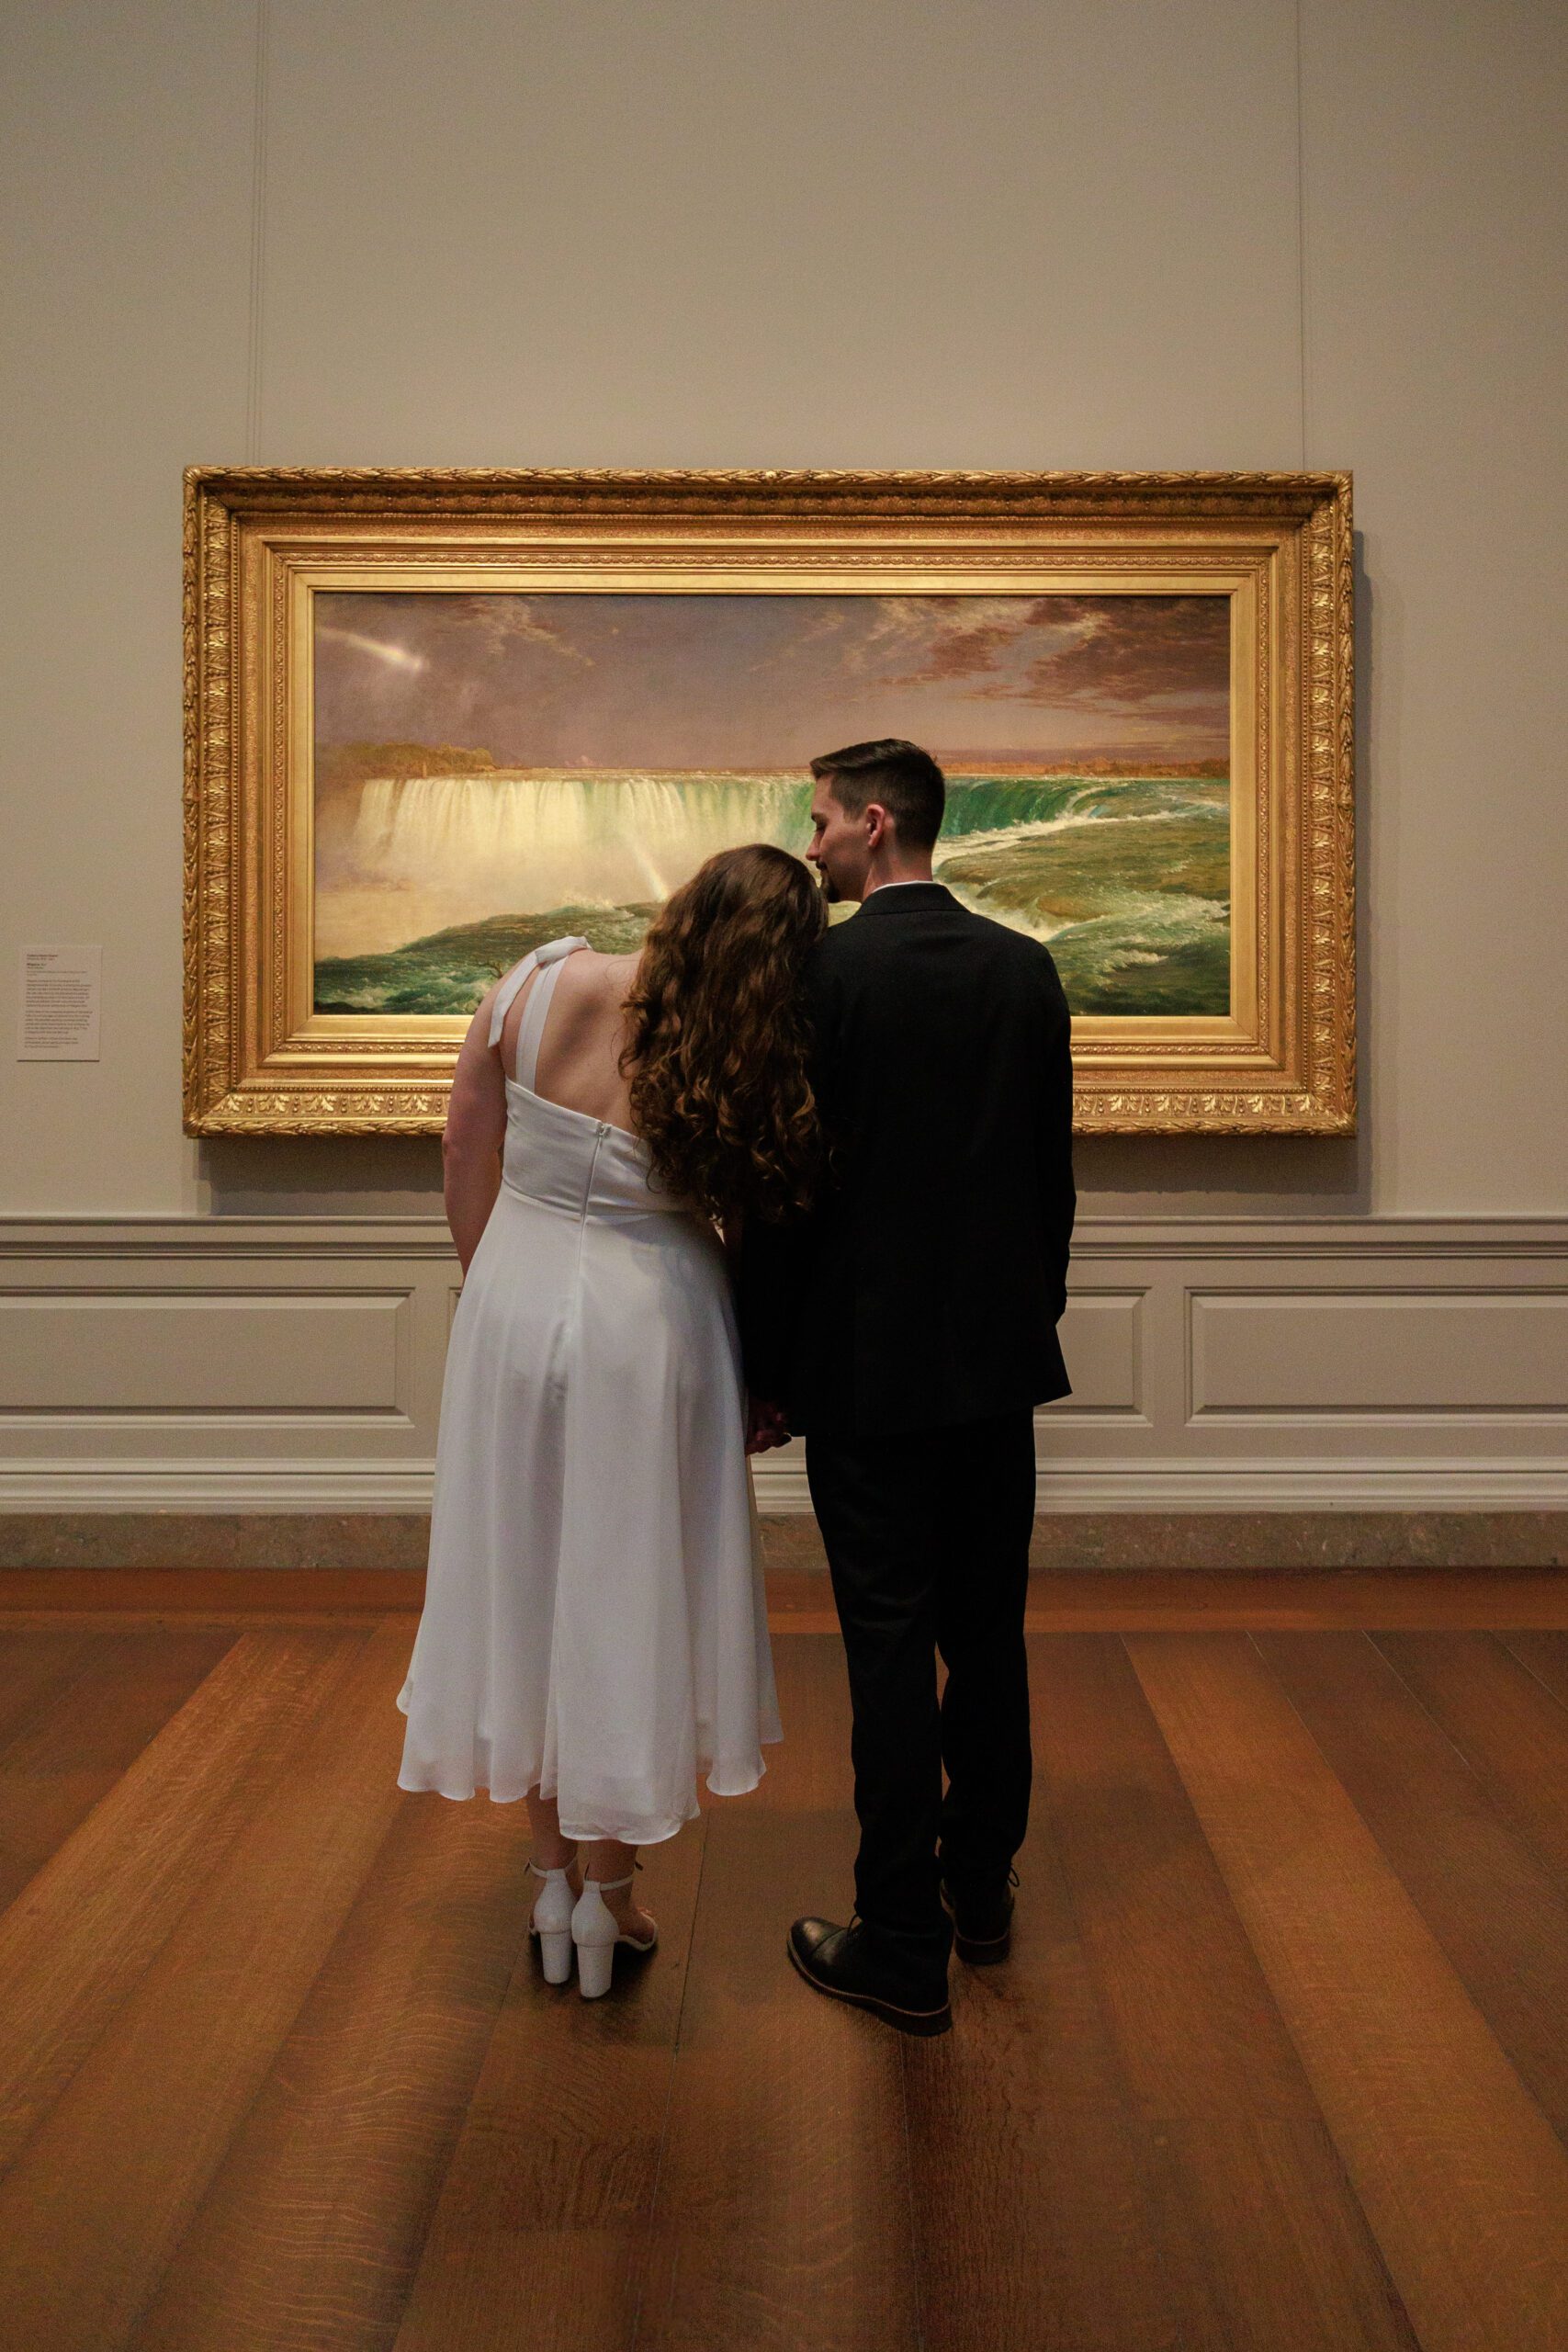 Engaged couple shares a moment in front of a gold frame and waterfall art in washington dc